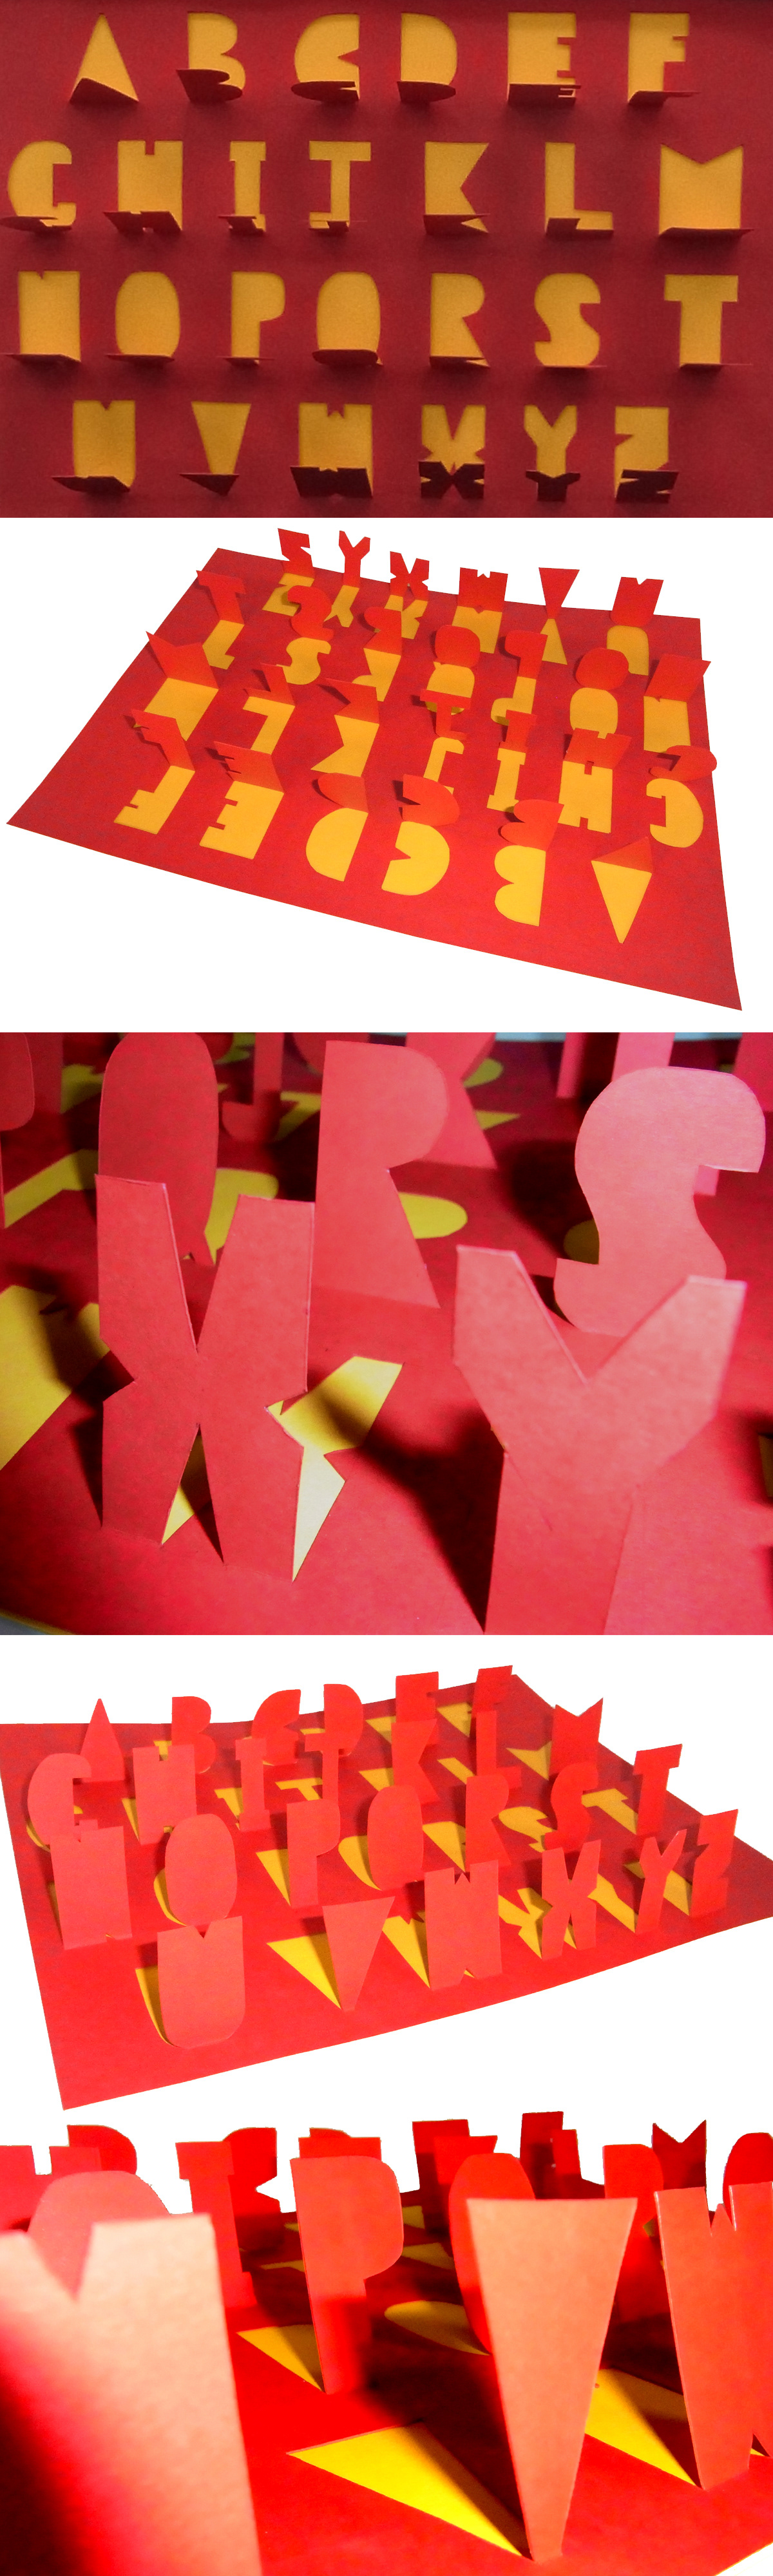 type cut out red yellow alphabet block Form graphic simple experiment handmade letters photo